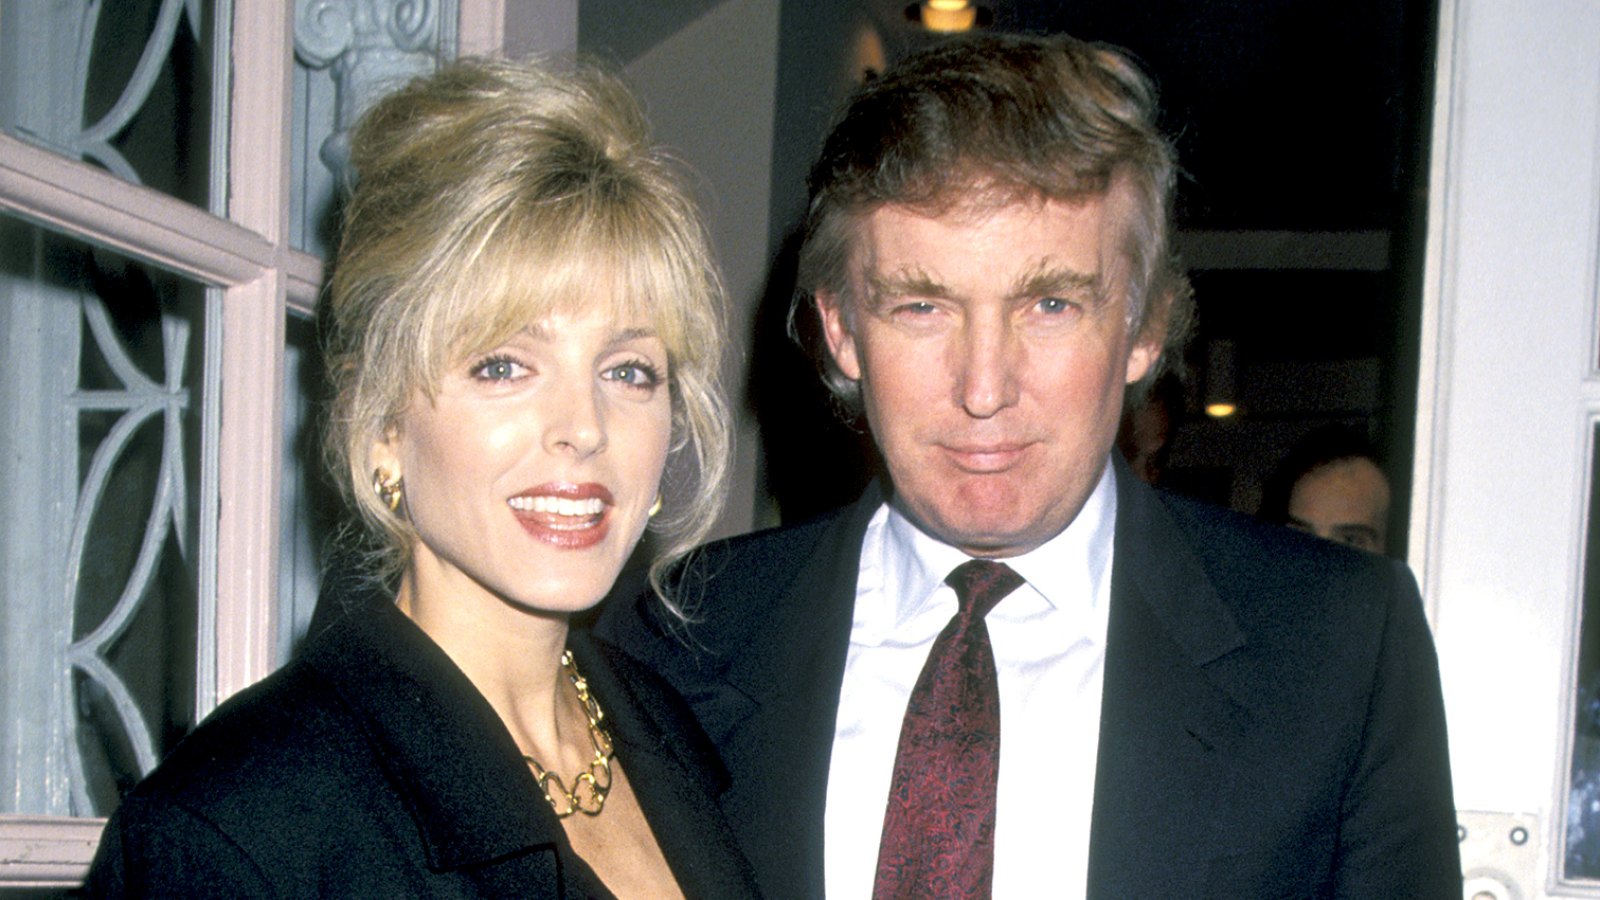 Marla Maples and Donald Trump in 1994.